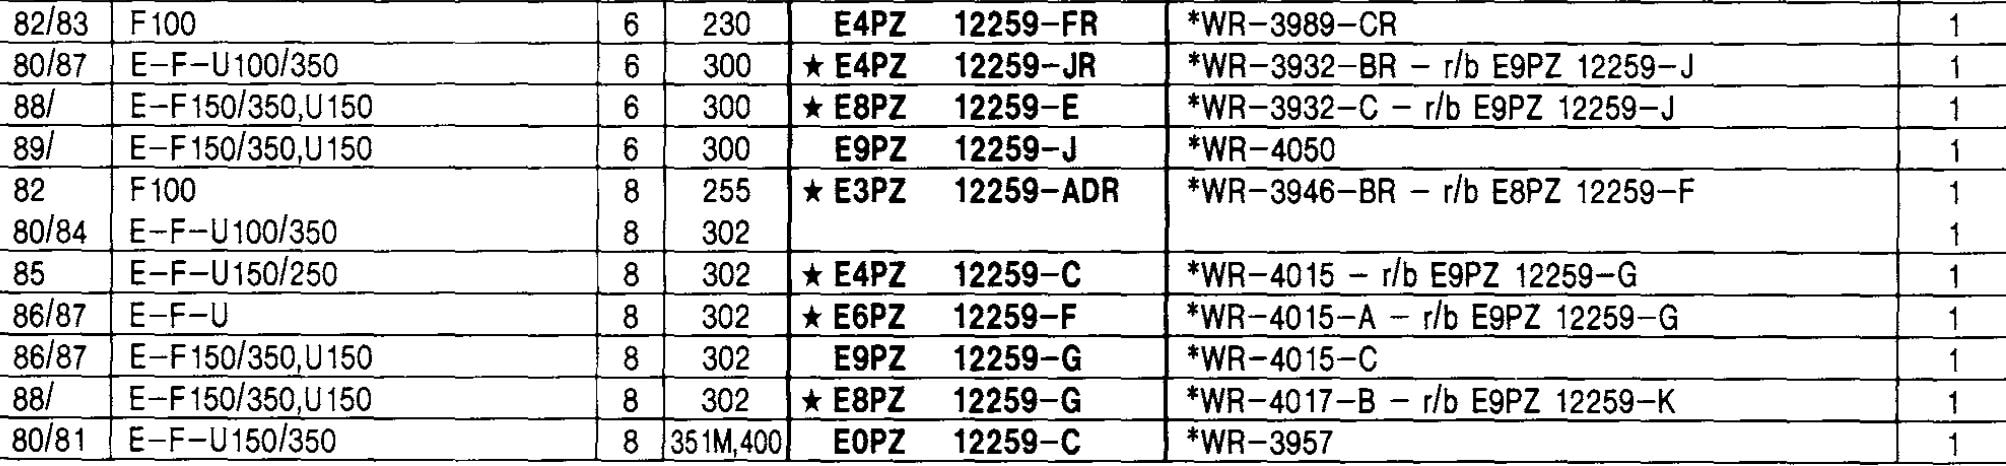 Wiring Diagram Info: 32 1986 Ford F150 Ignition Wiring Diagram